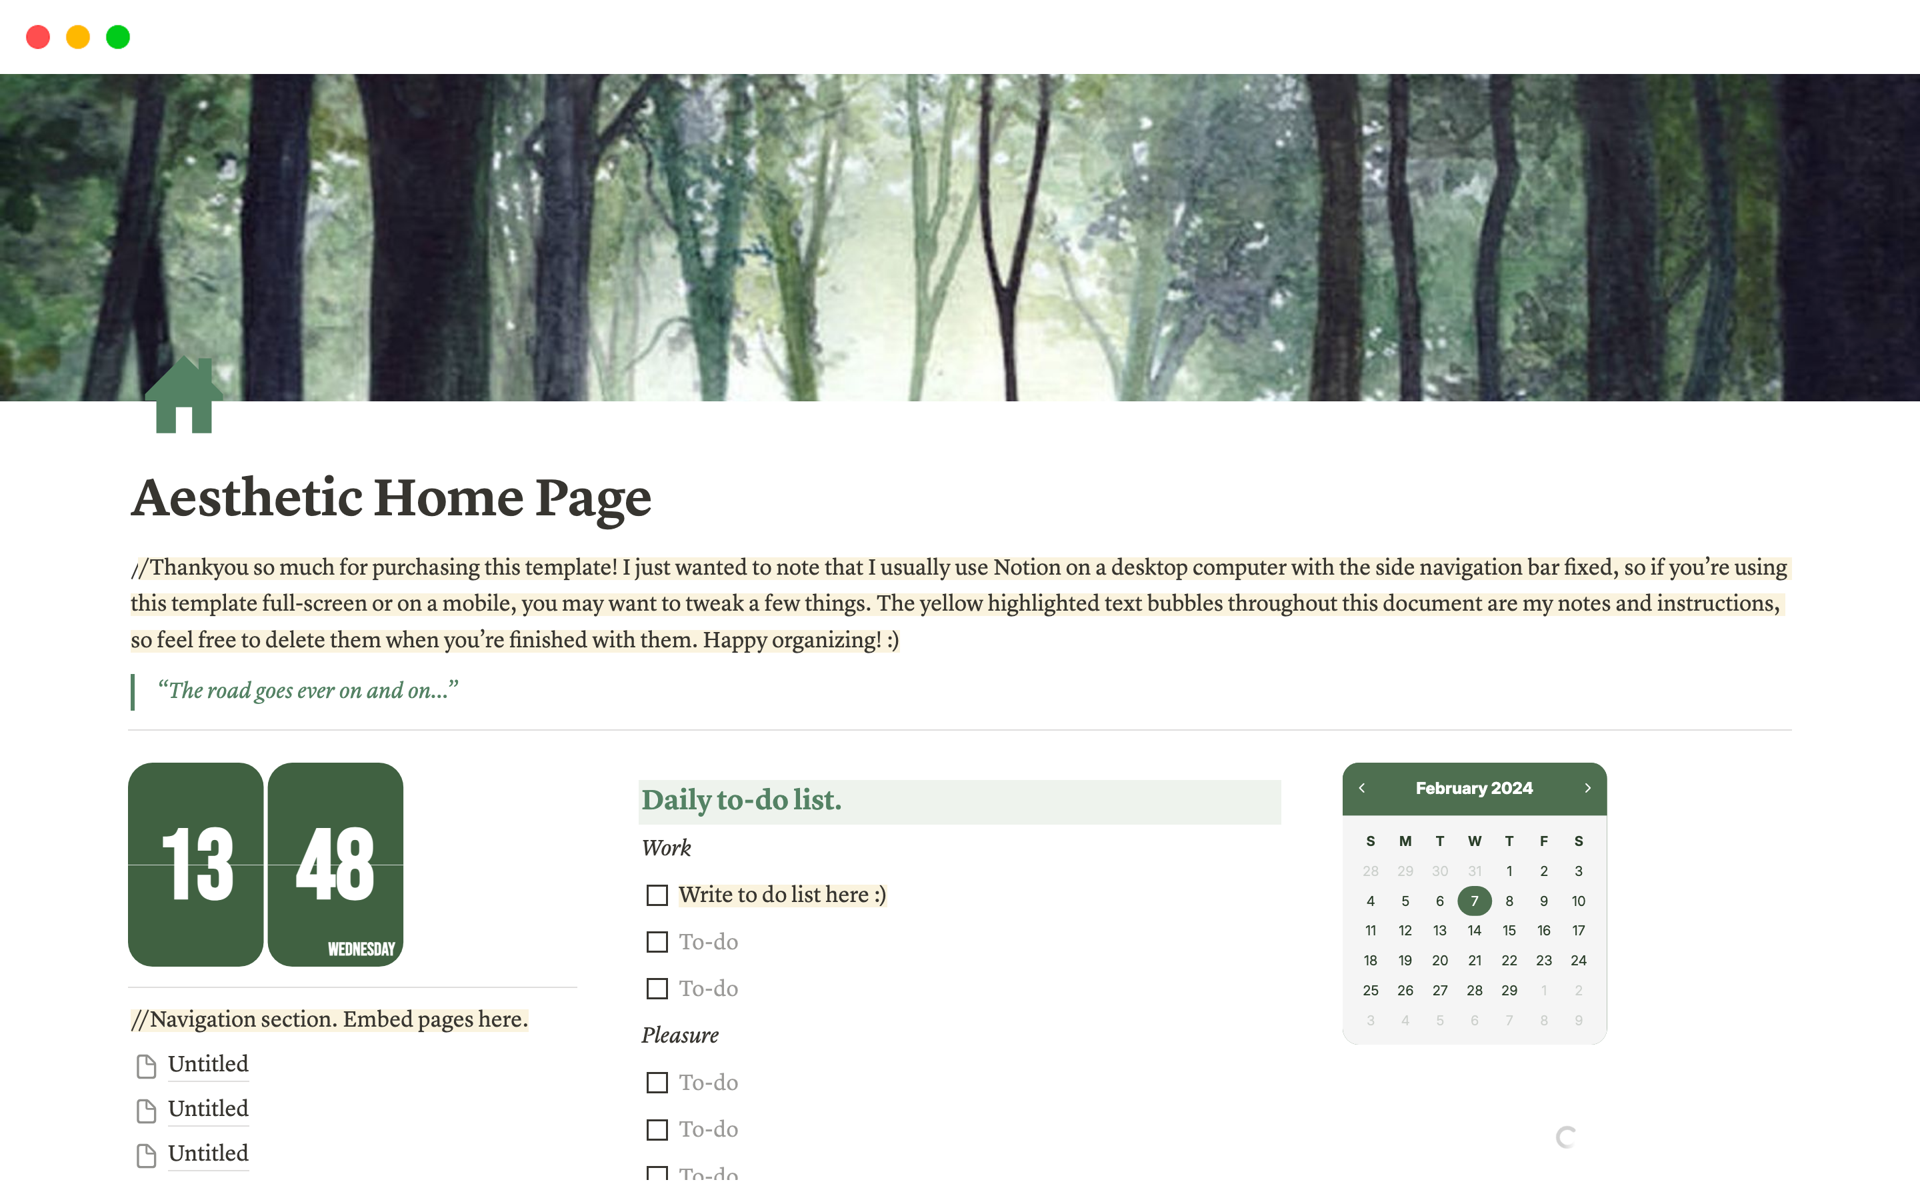 Let your productivity thrive in an atmosphere of tranquil forest, with this serene yet practical template.